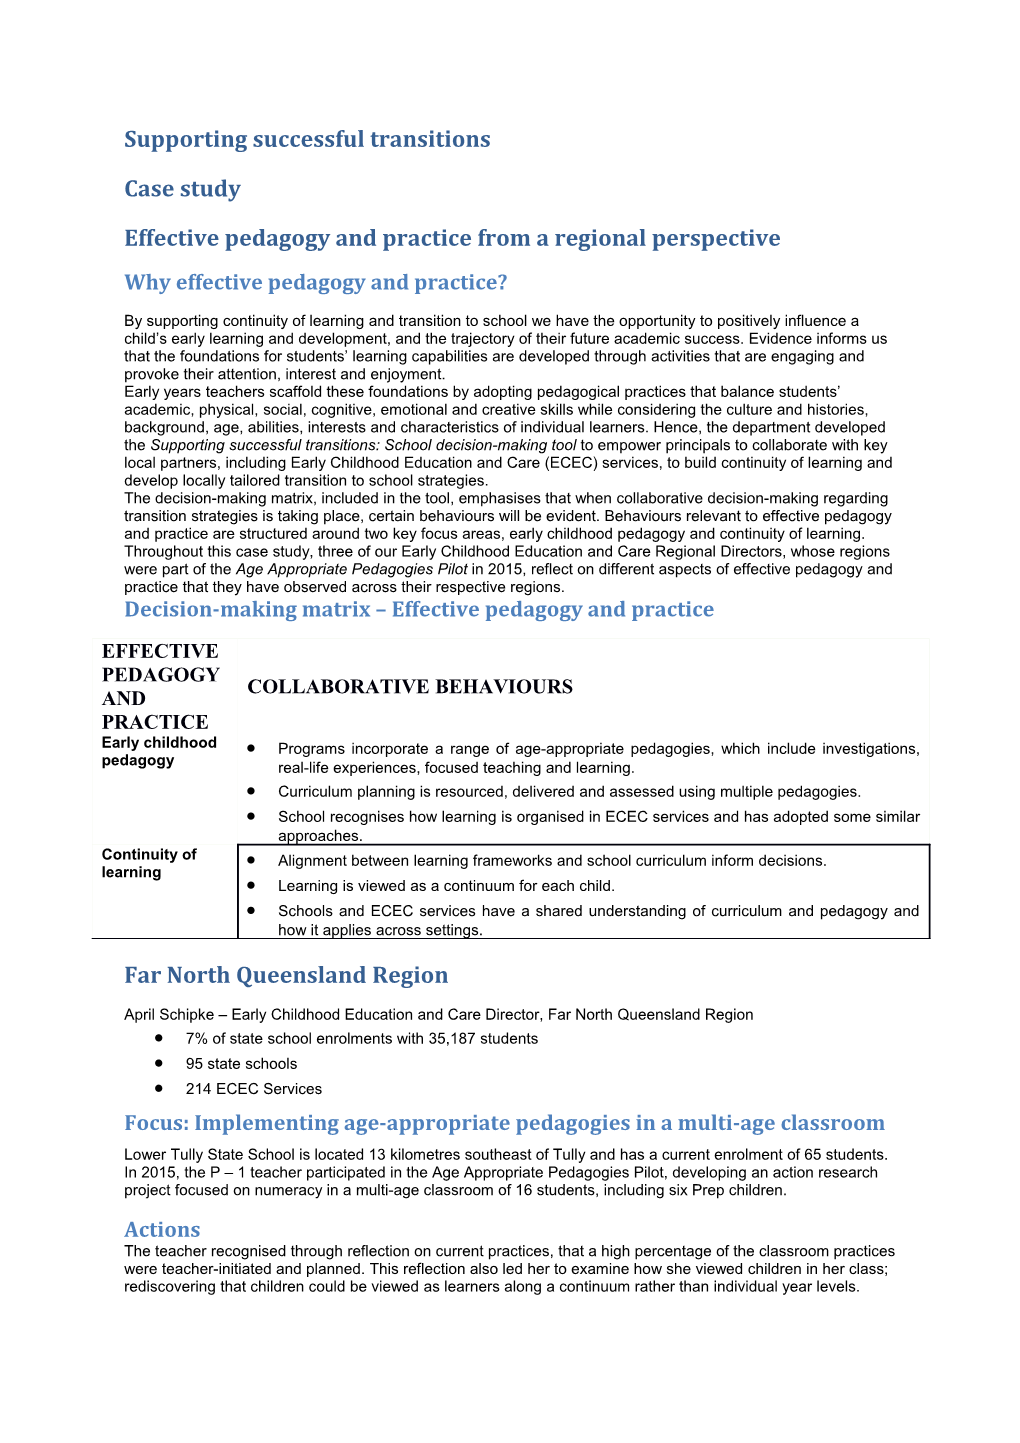 Effective Pedagogy and Practice from a Regional Perspective